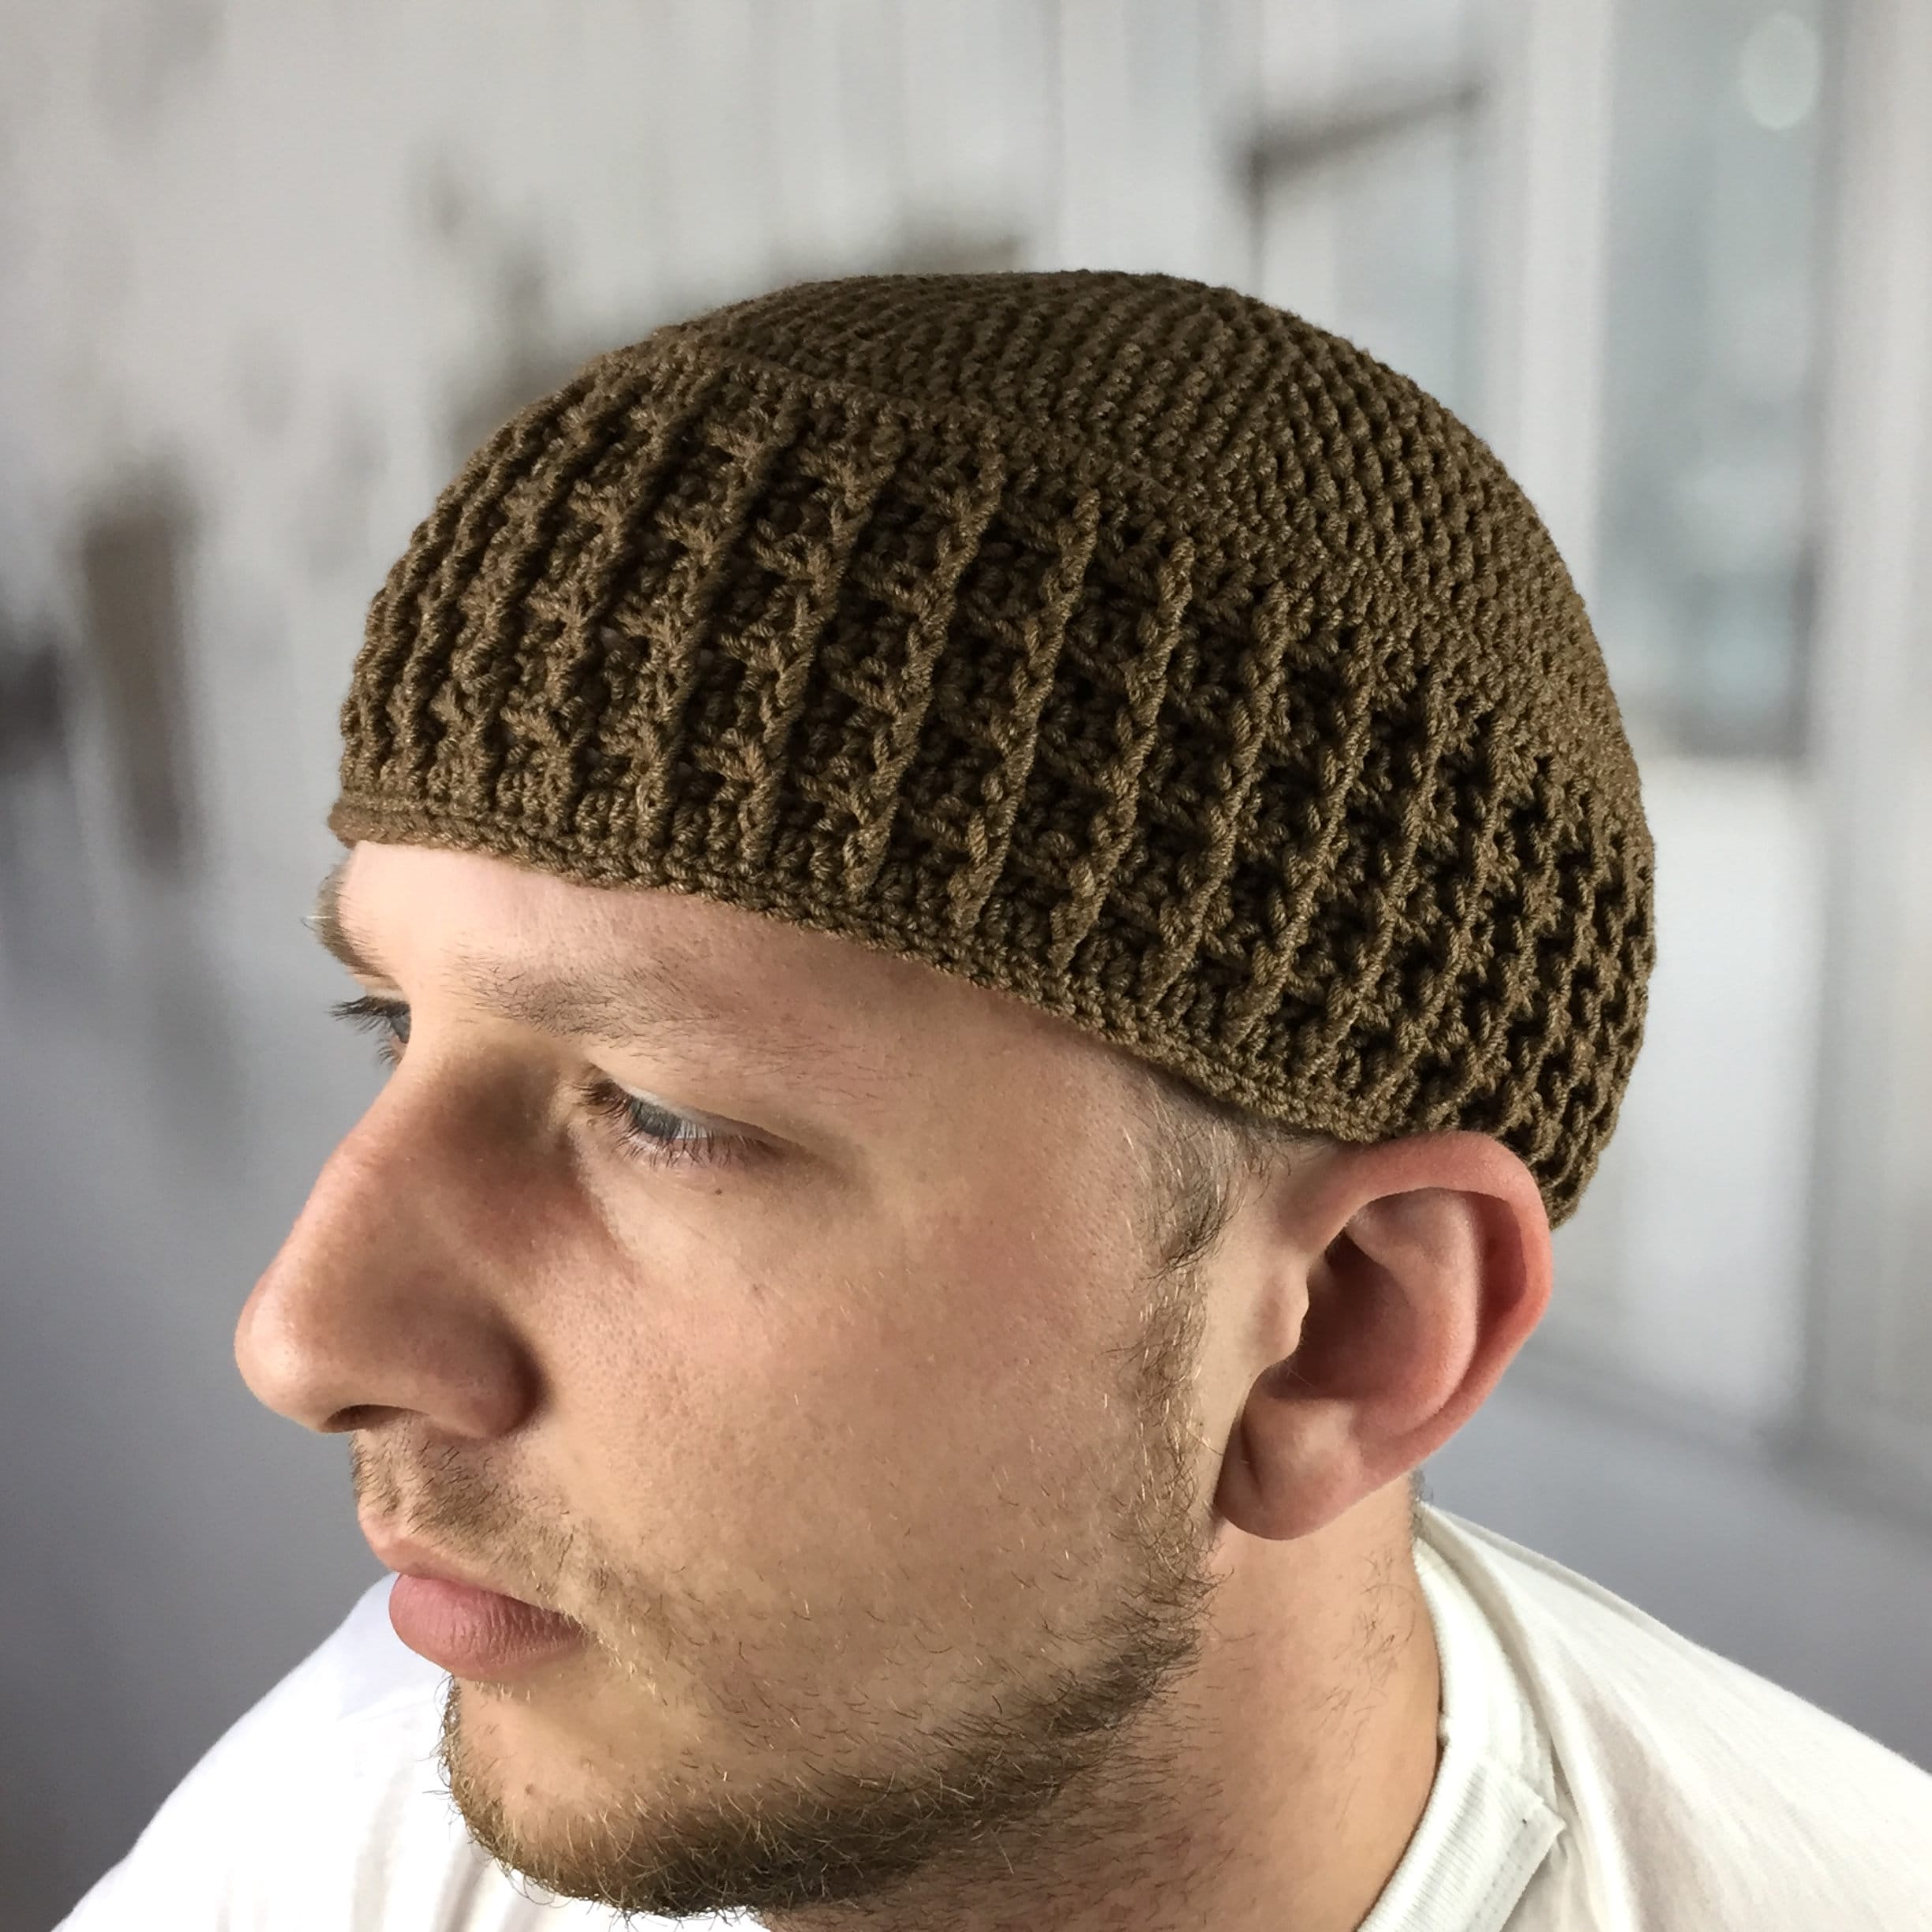 Grand kufi or homme kufi prière islamique grande taille Omra